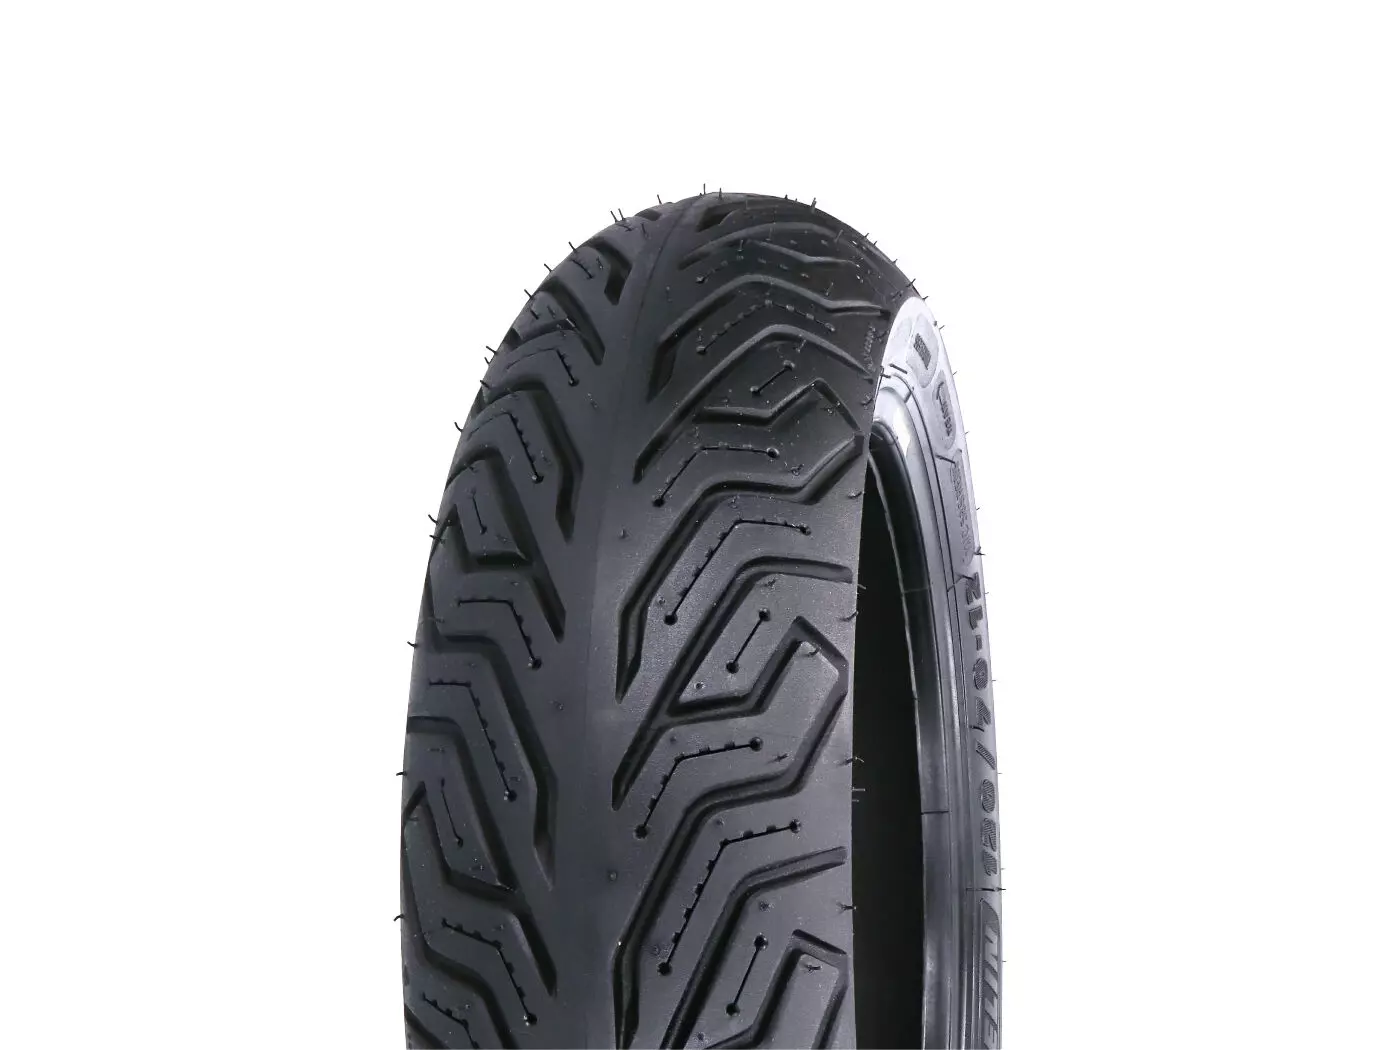 Band Michelin City Grip 2 M+S 120/80-14 58S TL